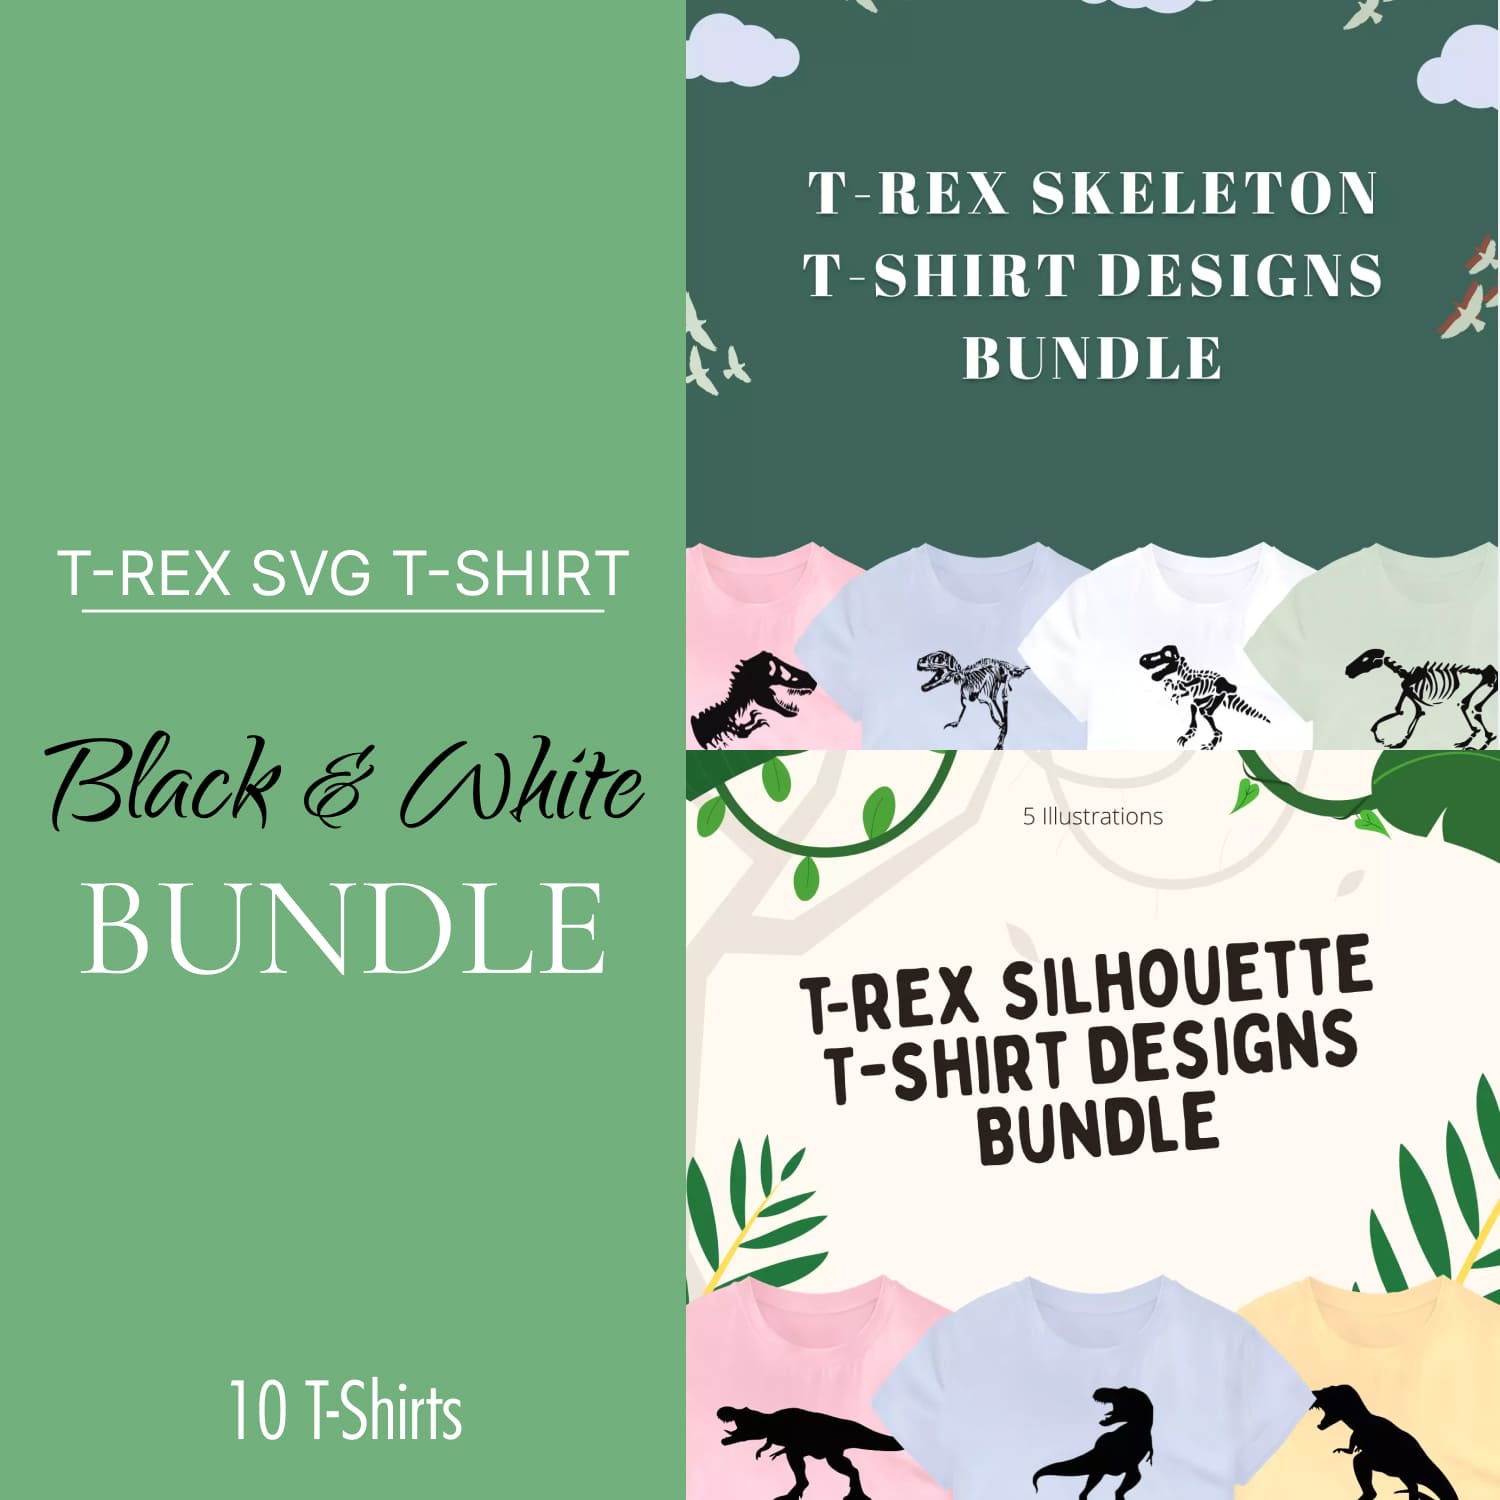 A set of images of t-shirts with an adorable t-rex print.